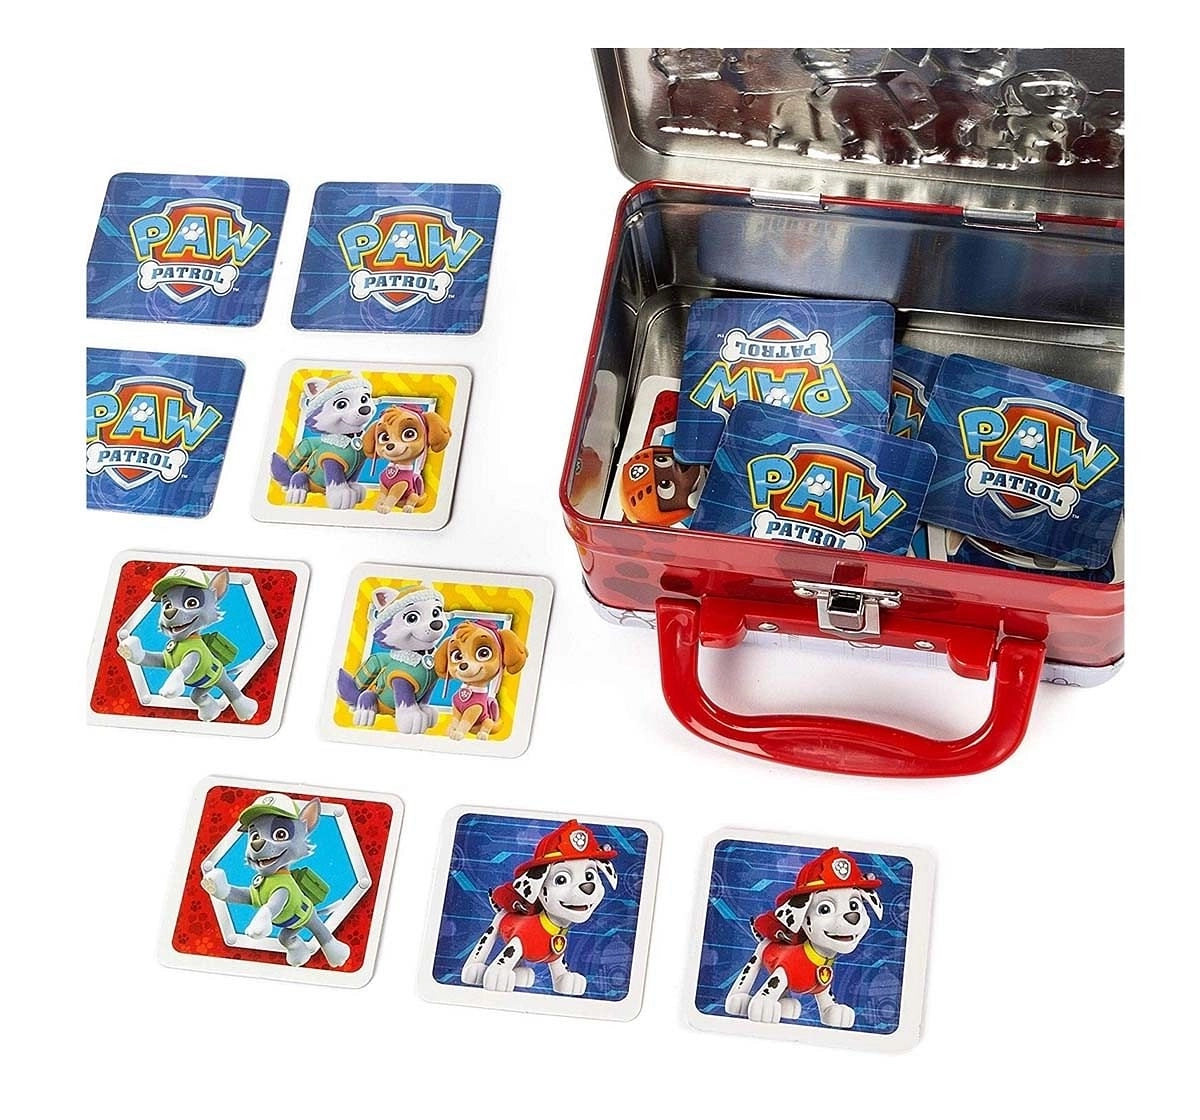 Cardinal Paw Patrol Memory Match 72 Cards Board Games for Kids age 3Y+ 